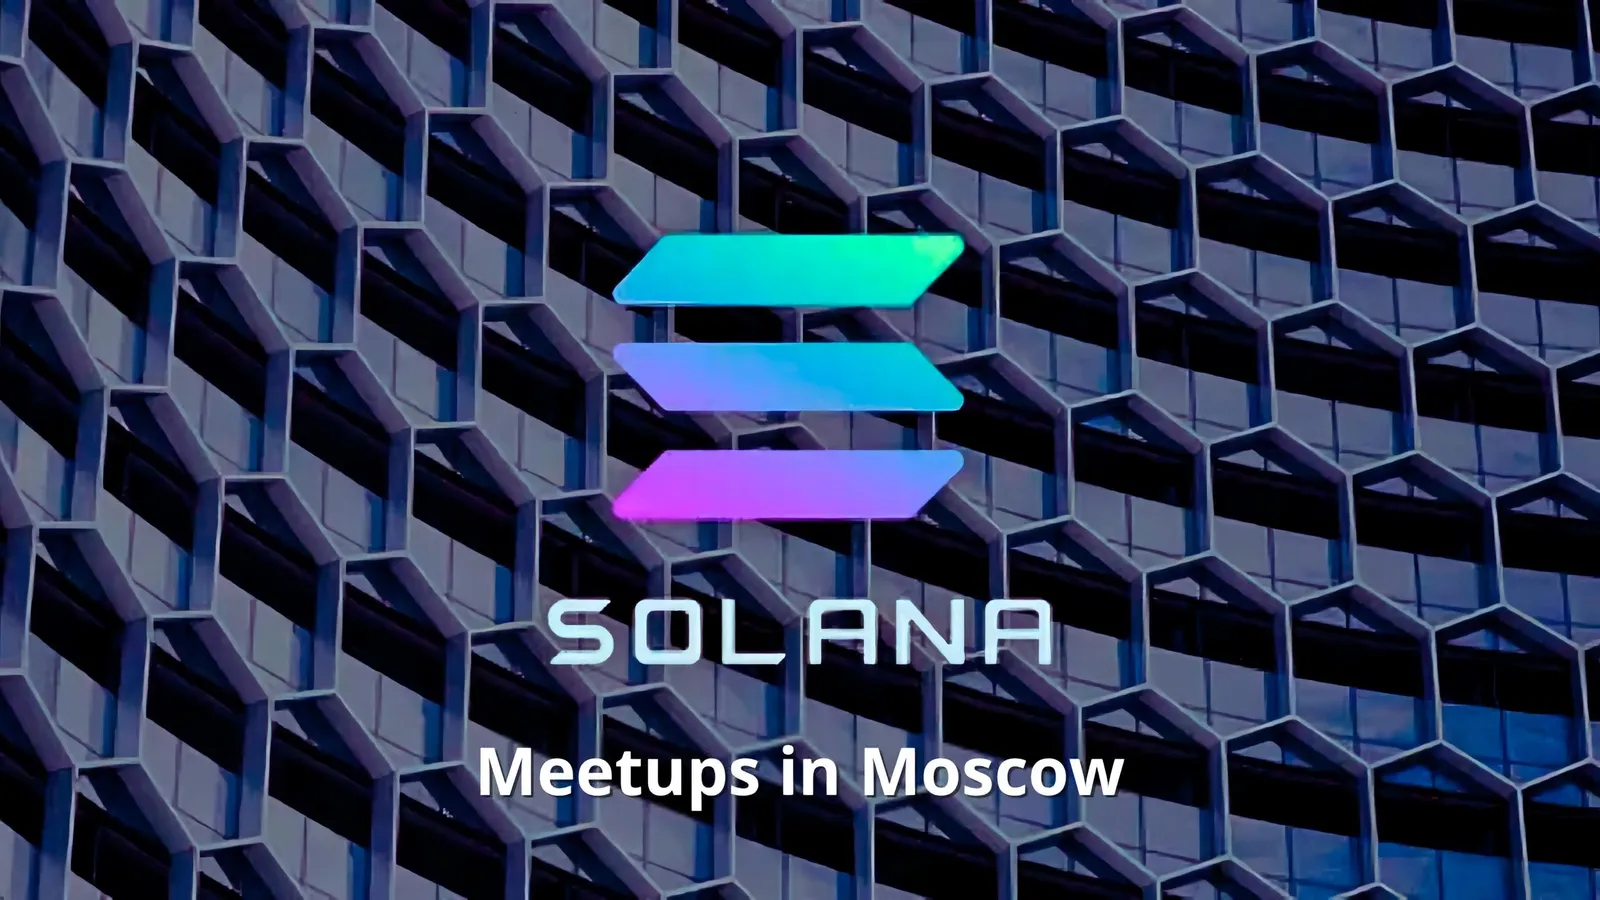 Solana Meetups in Moscow